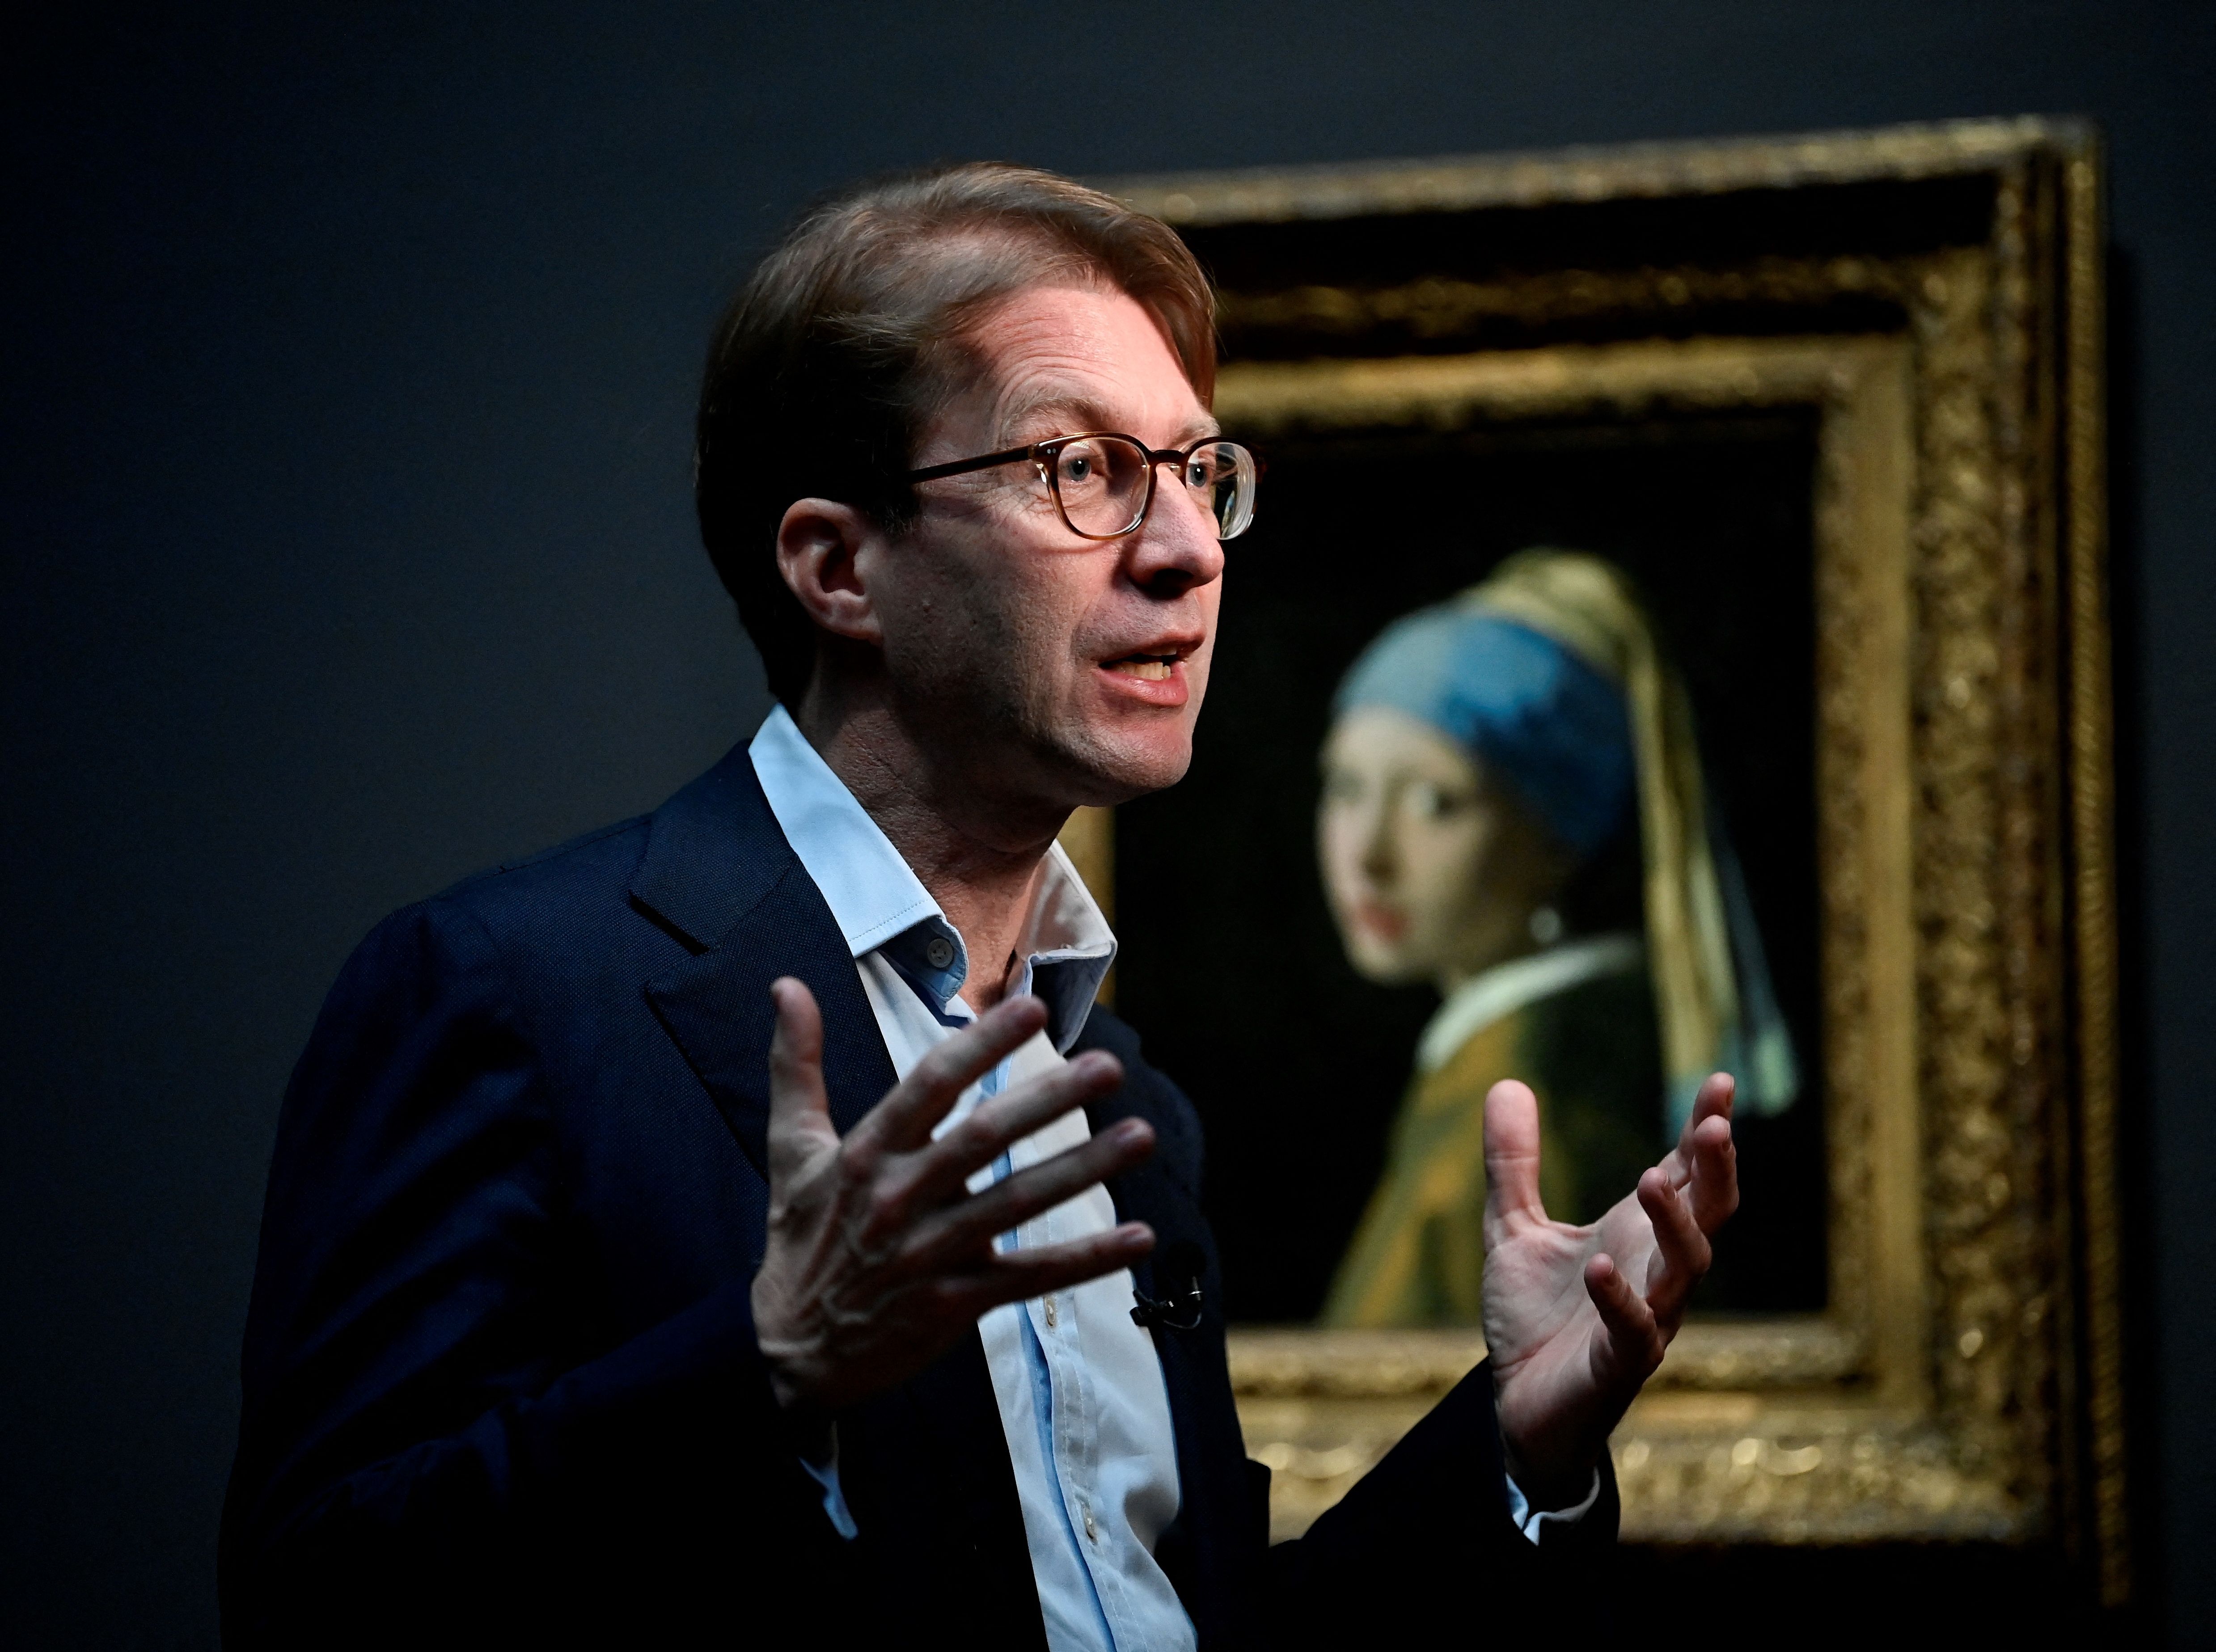 Rijksmuseum General Director, Taco Dibbits, speaks in front of "The Girl with a pearl earring" ​ ​ ​ ​ ​ ​ ​ ​ ​ ​ ​ ​ ​ © BELGA PHOTO(JOHN THYS / AFP)